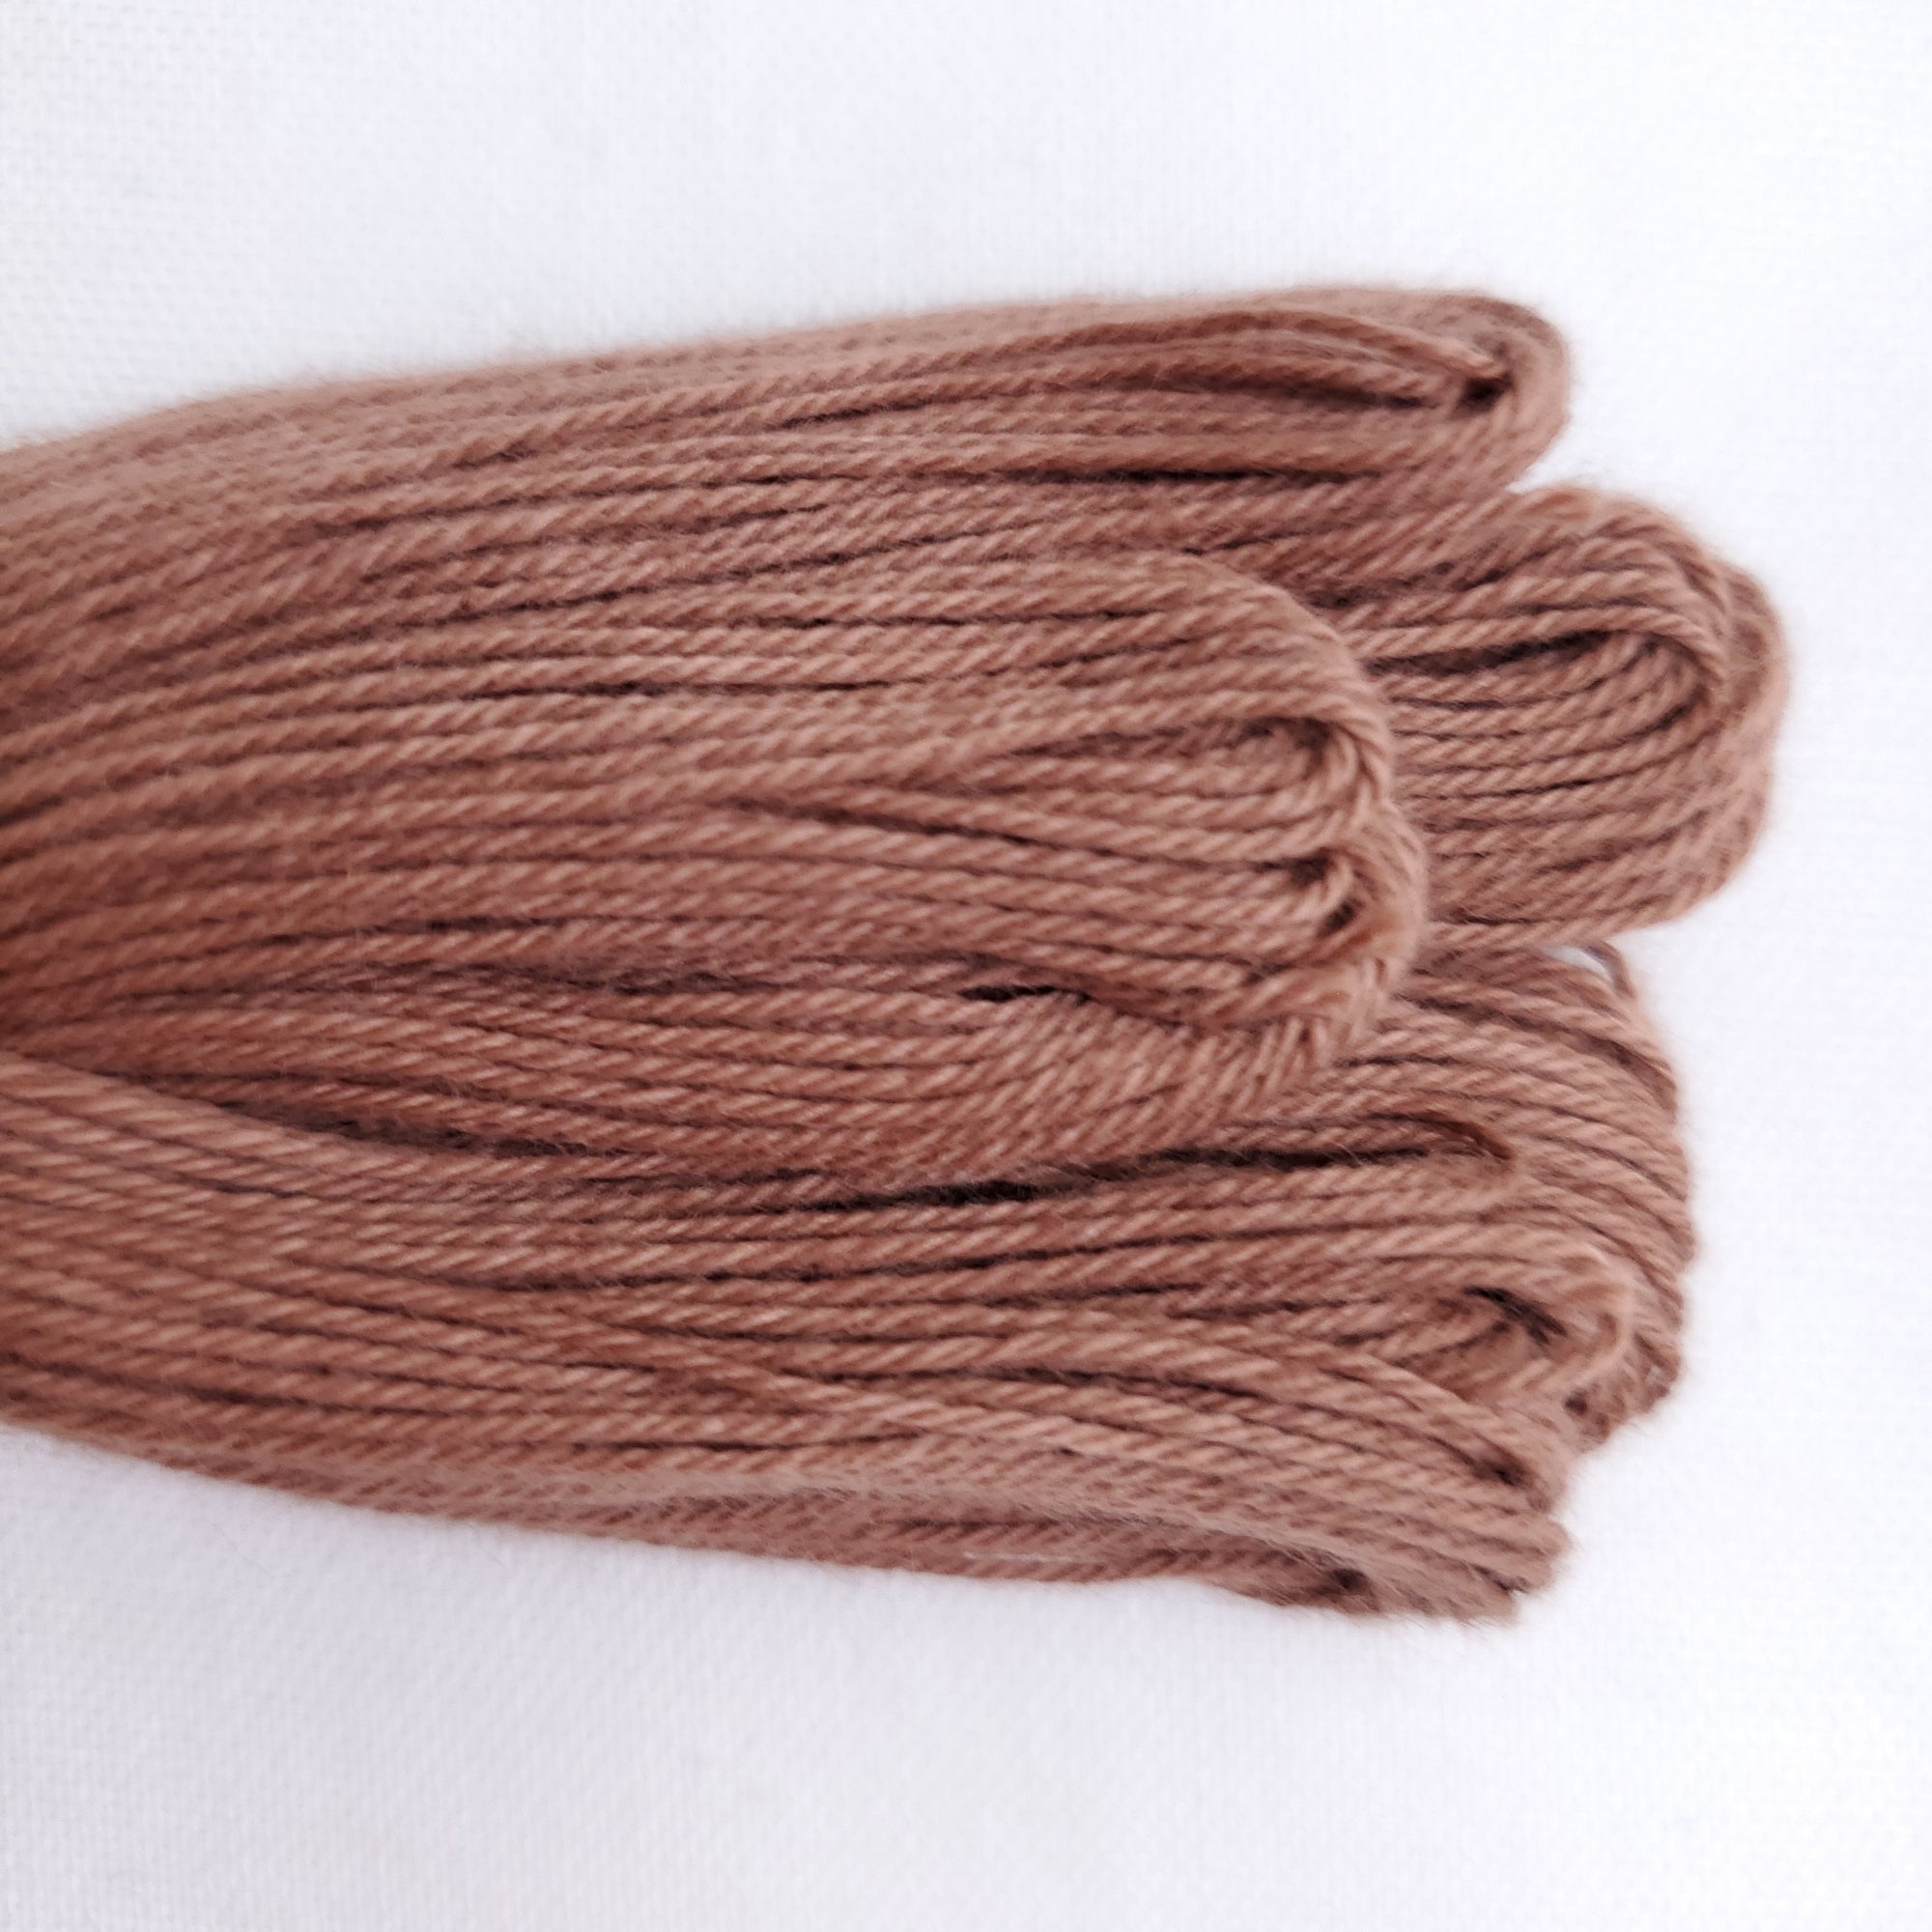 Natural Dyed Embroidery Thread - Color E5